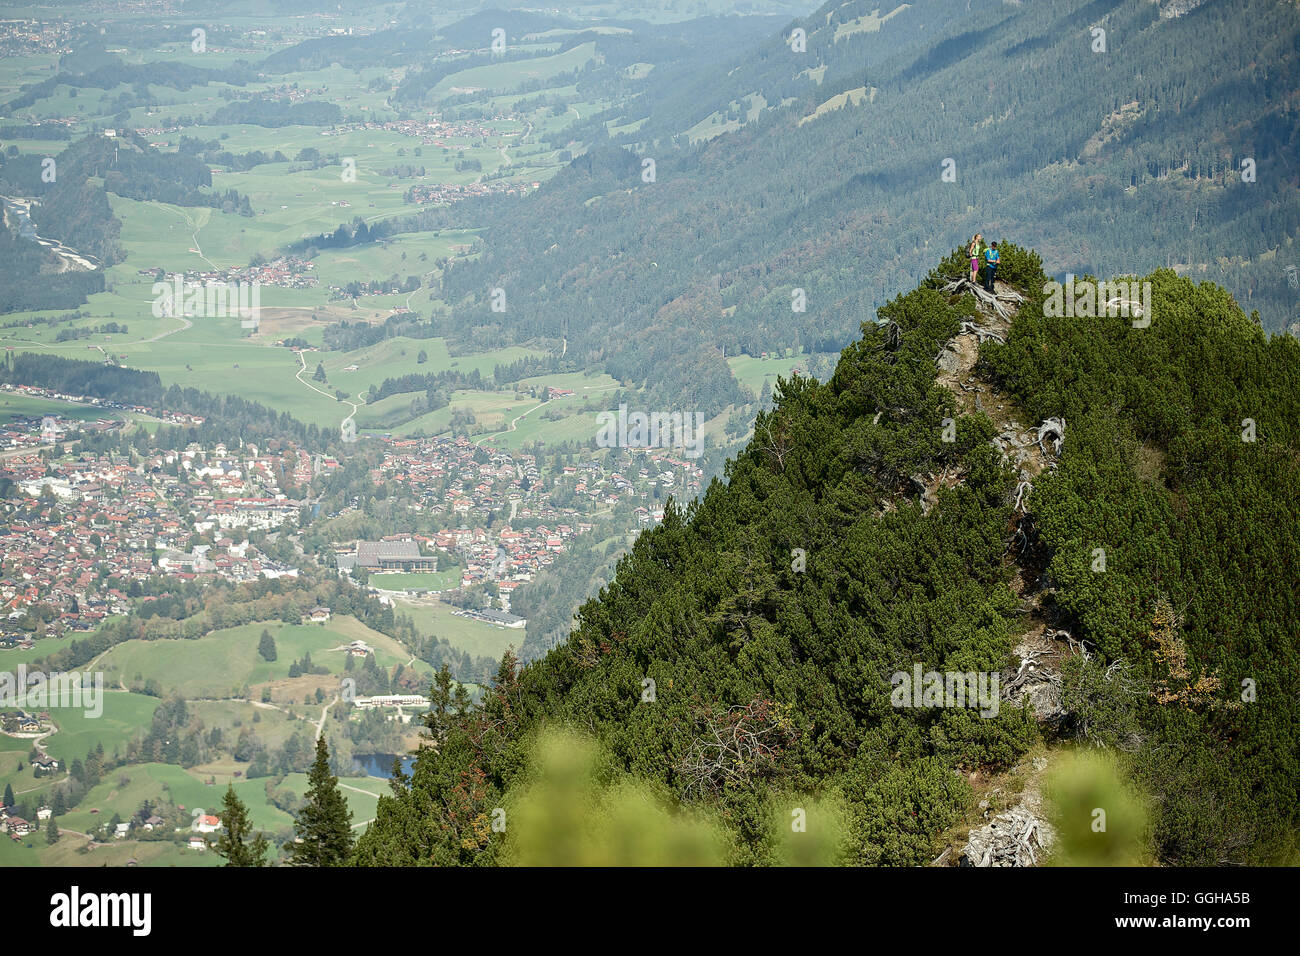 A man and a woman hiking in the mountains, Oberstdorf, Bavaria, Germany Stock Photo